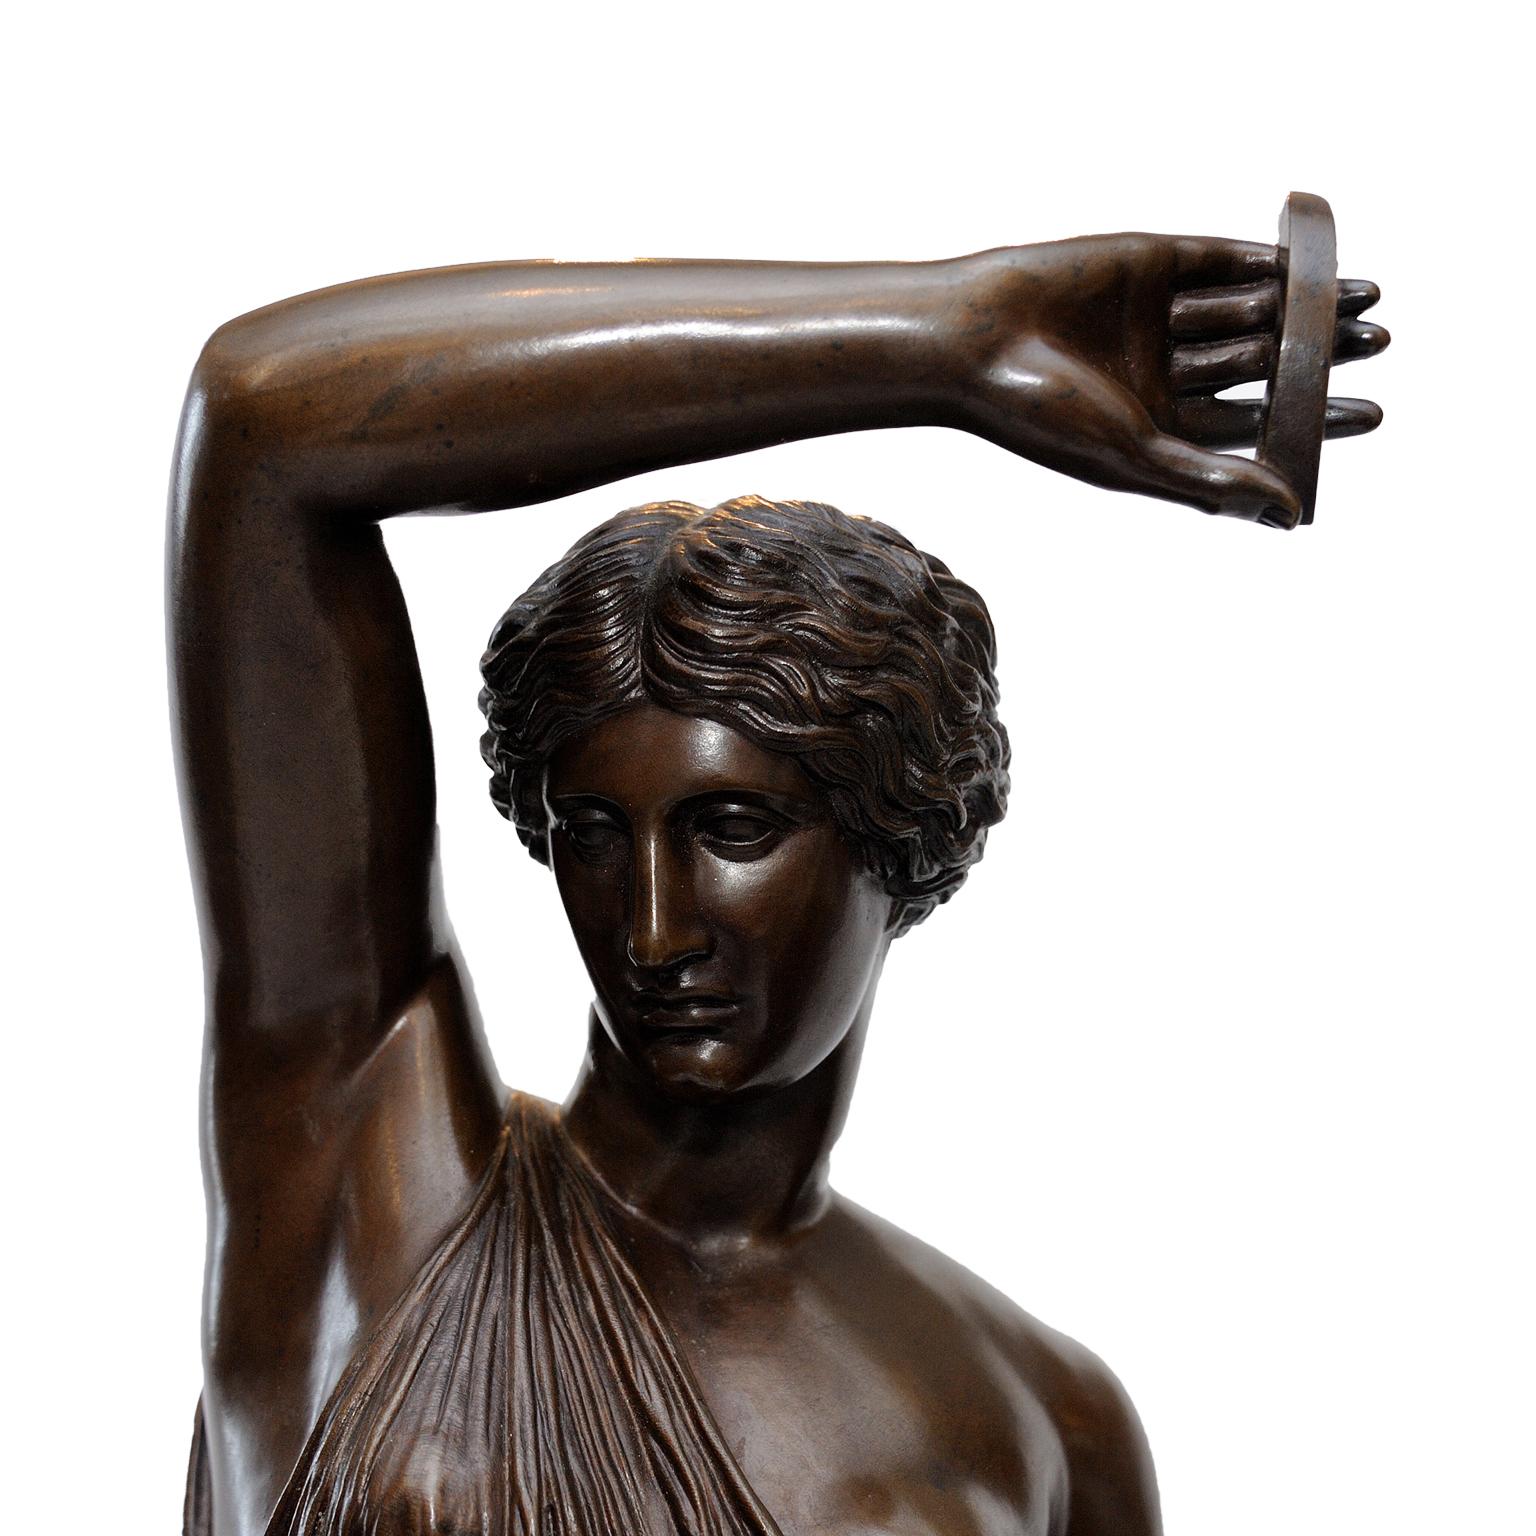 Large French Mid-19th Century Bronze Classical Figure, circa 1850 For Sale 3